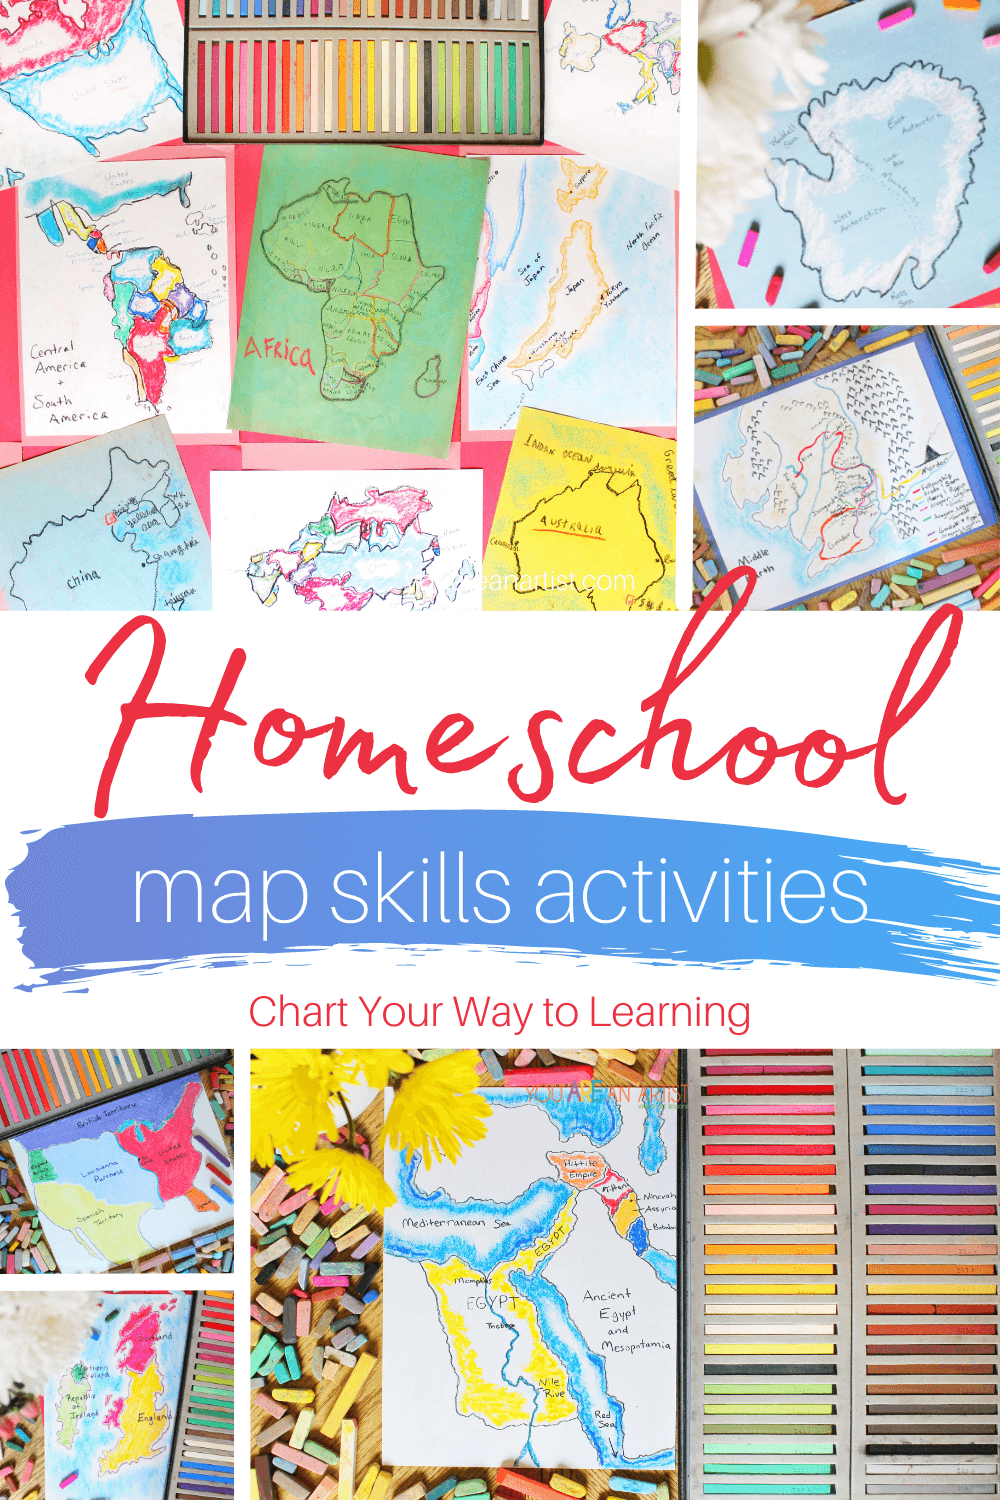 Homeschool Map Skills Activities Chart Your Way To Learning: Check out these homeschool map skills activities using chalk pastels! They are perfect for helping kids learn about maps and how maps work. You'll need a set of chalk pastels, a pack of construction paper, and your You ARE An Artist Clubhouse Membership! #maps #mapskills #mapsskillsforkids #homeschoolmapskills #homeschool